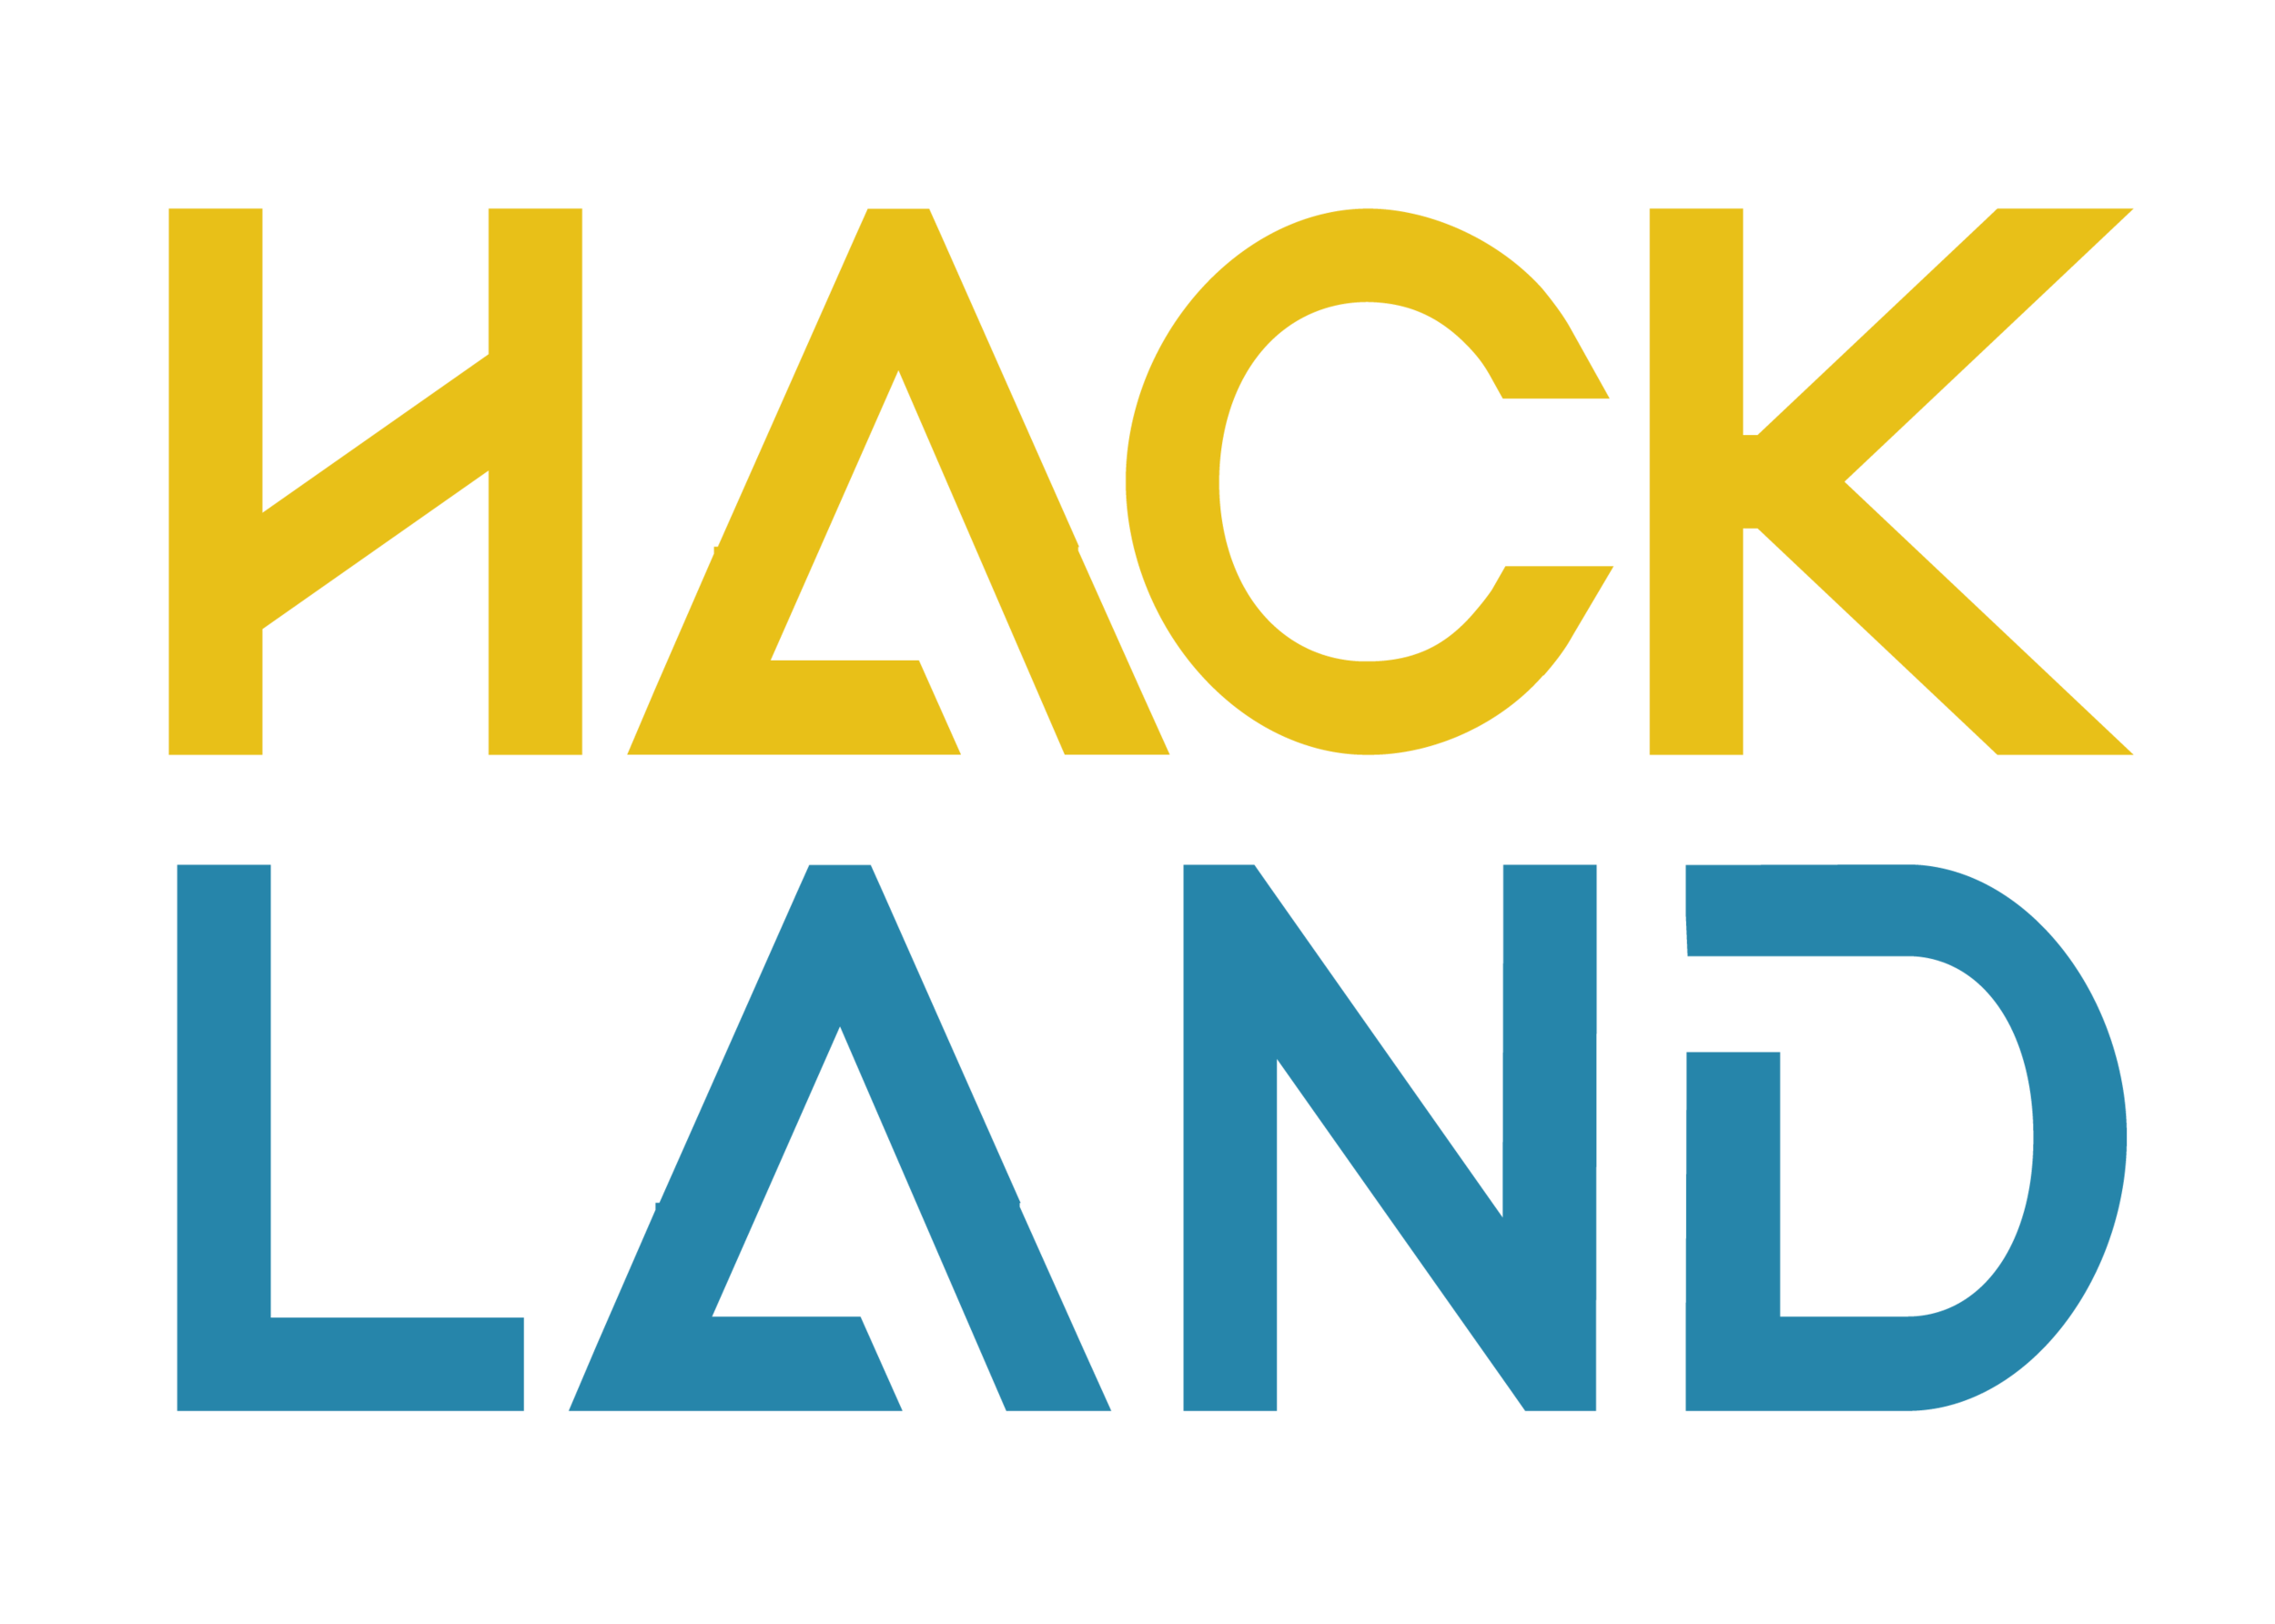 Hackland-2Lines.png